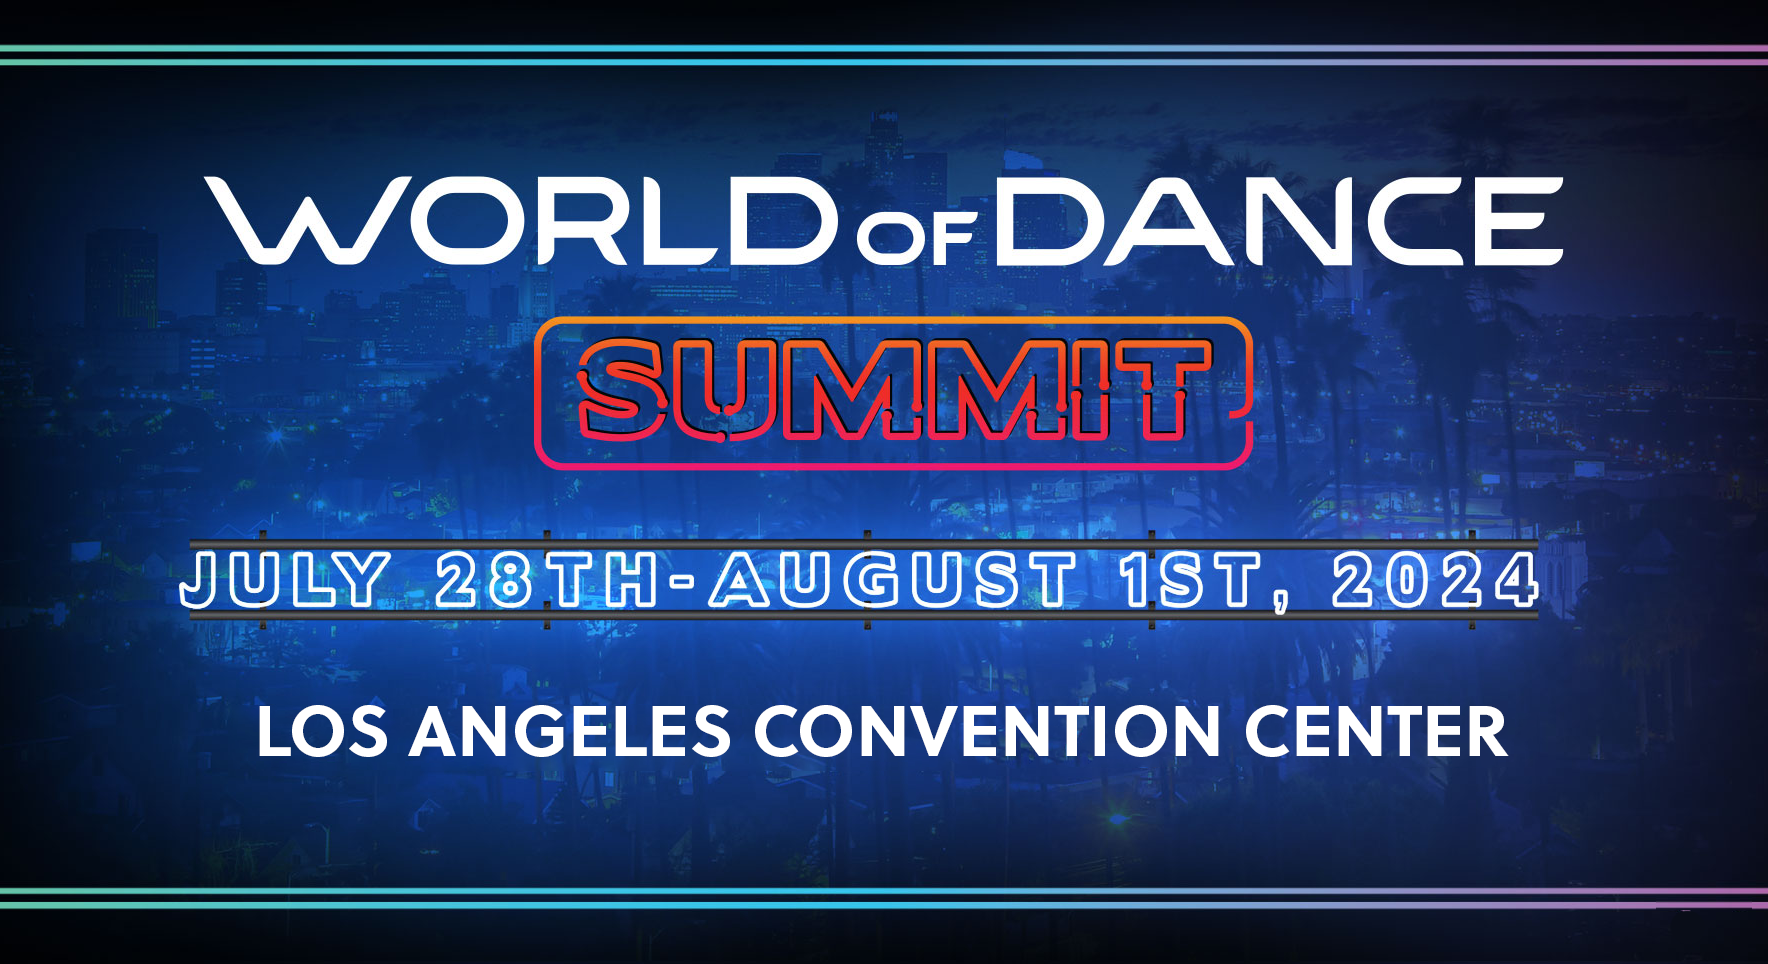 More Info for World of Dance Summit 2024